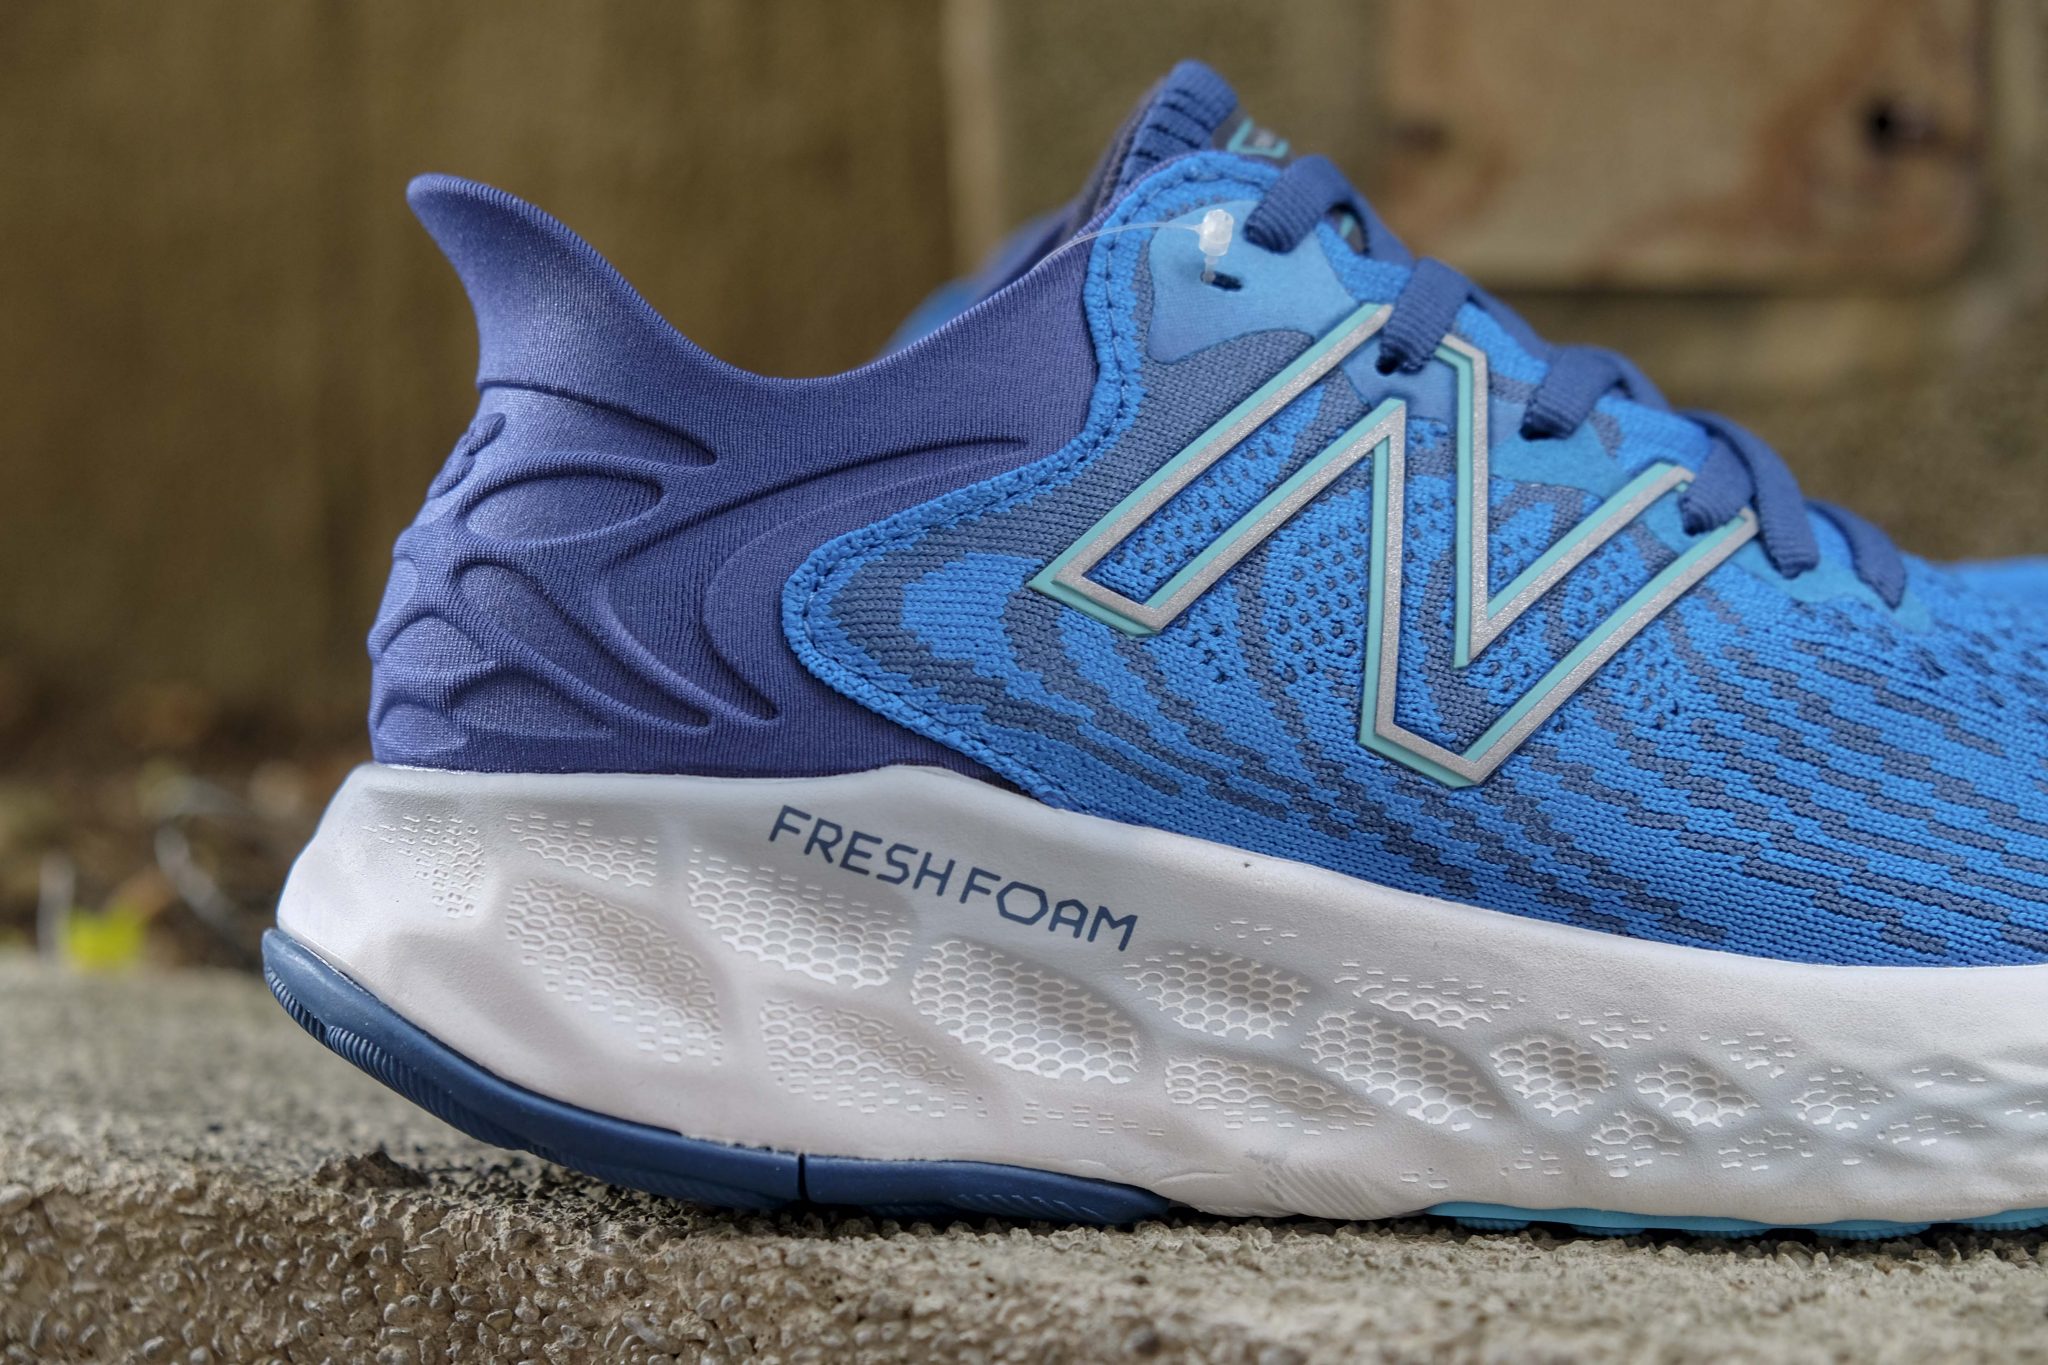 Introducing the New Balance Fresh Foam 1080v11 | Pinoy Fitness